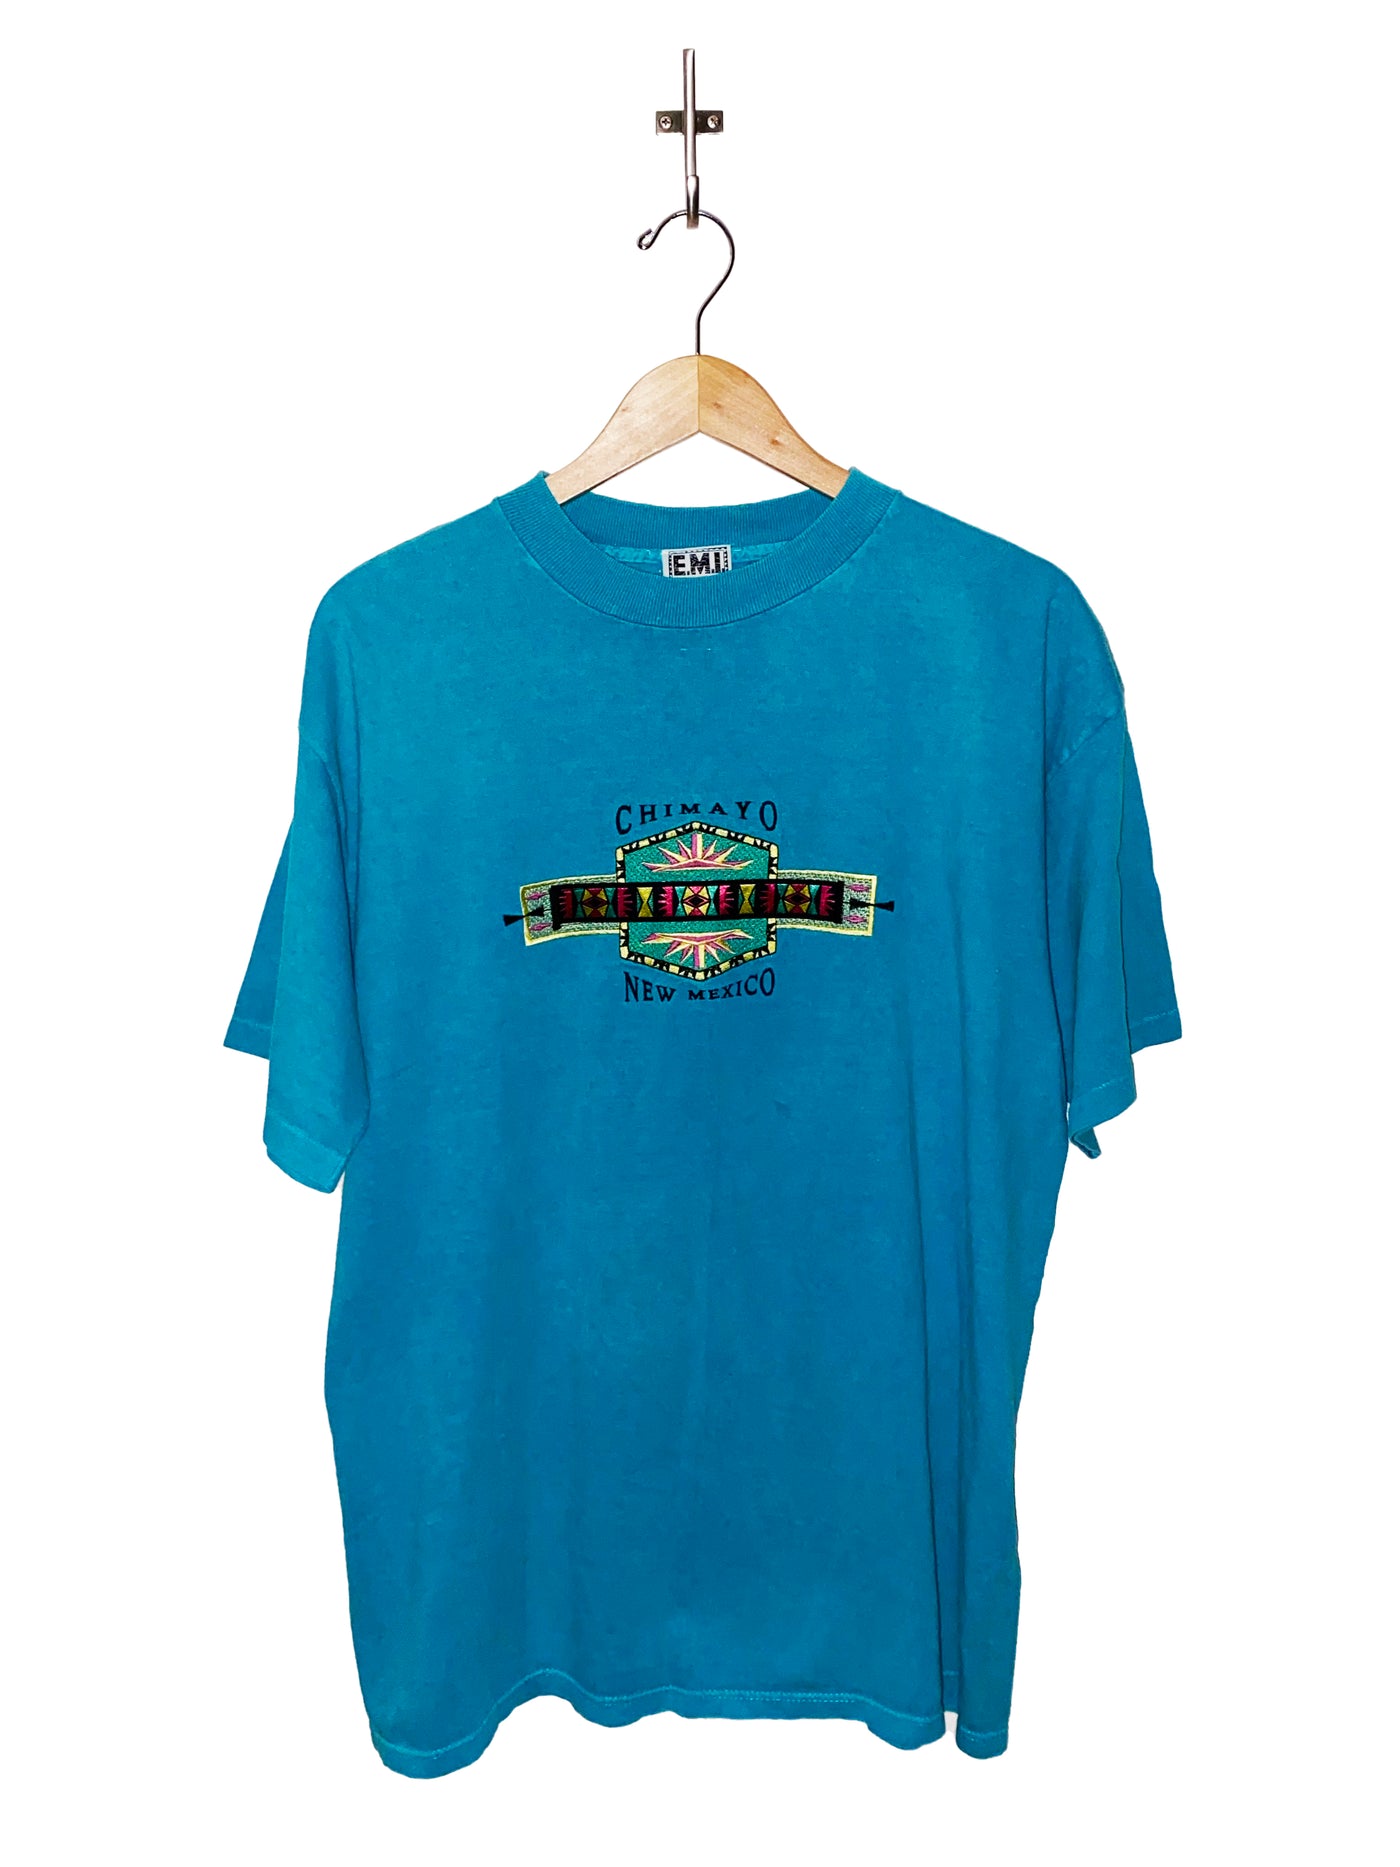 Vintage 80s Chimayo, New Mexico T-Shirt